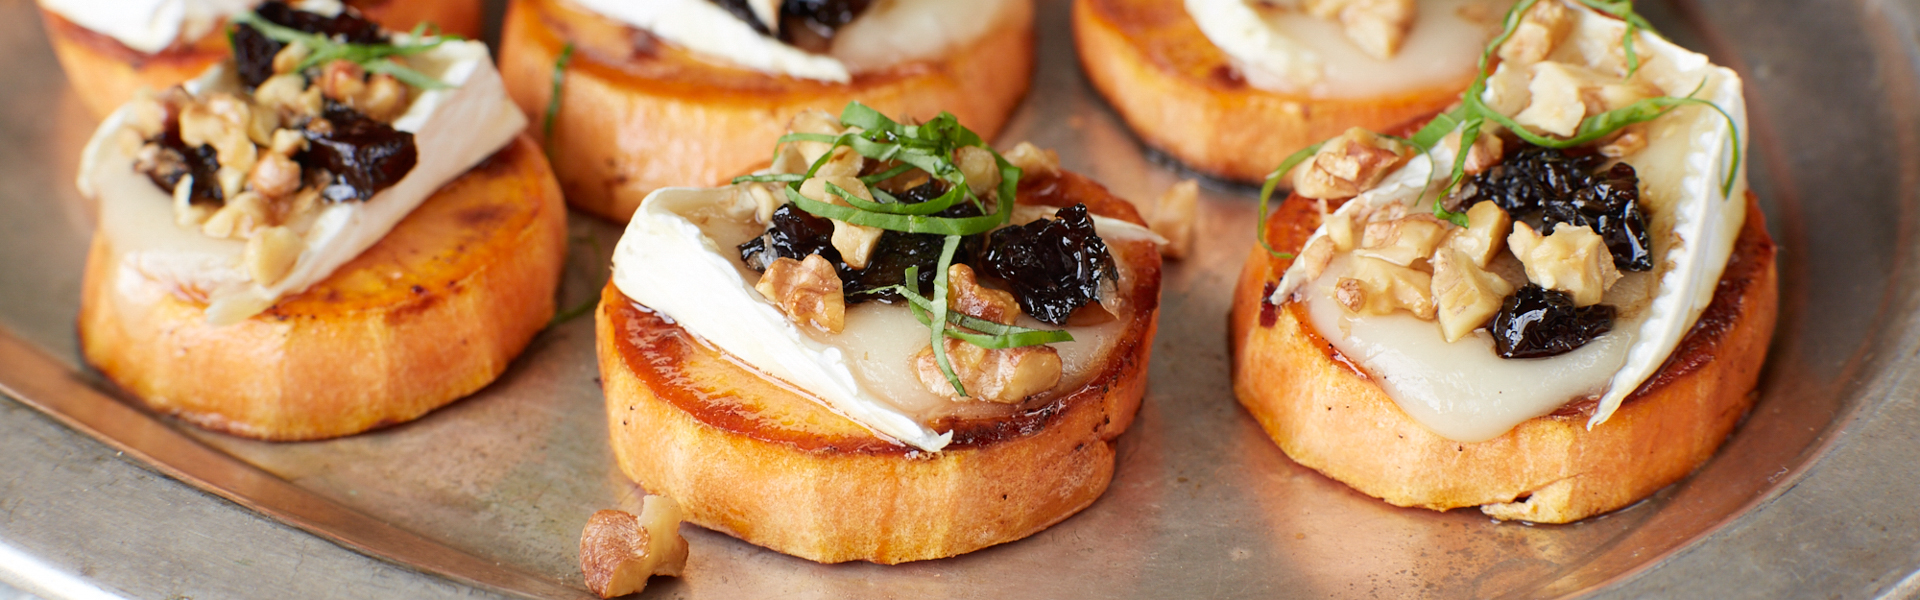 Use sweet potato slices instead of bread for a gluten-free crostini topped with brie and Sunsweet prunes that everyone will love.